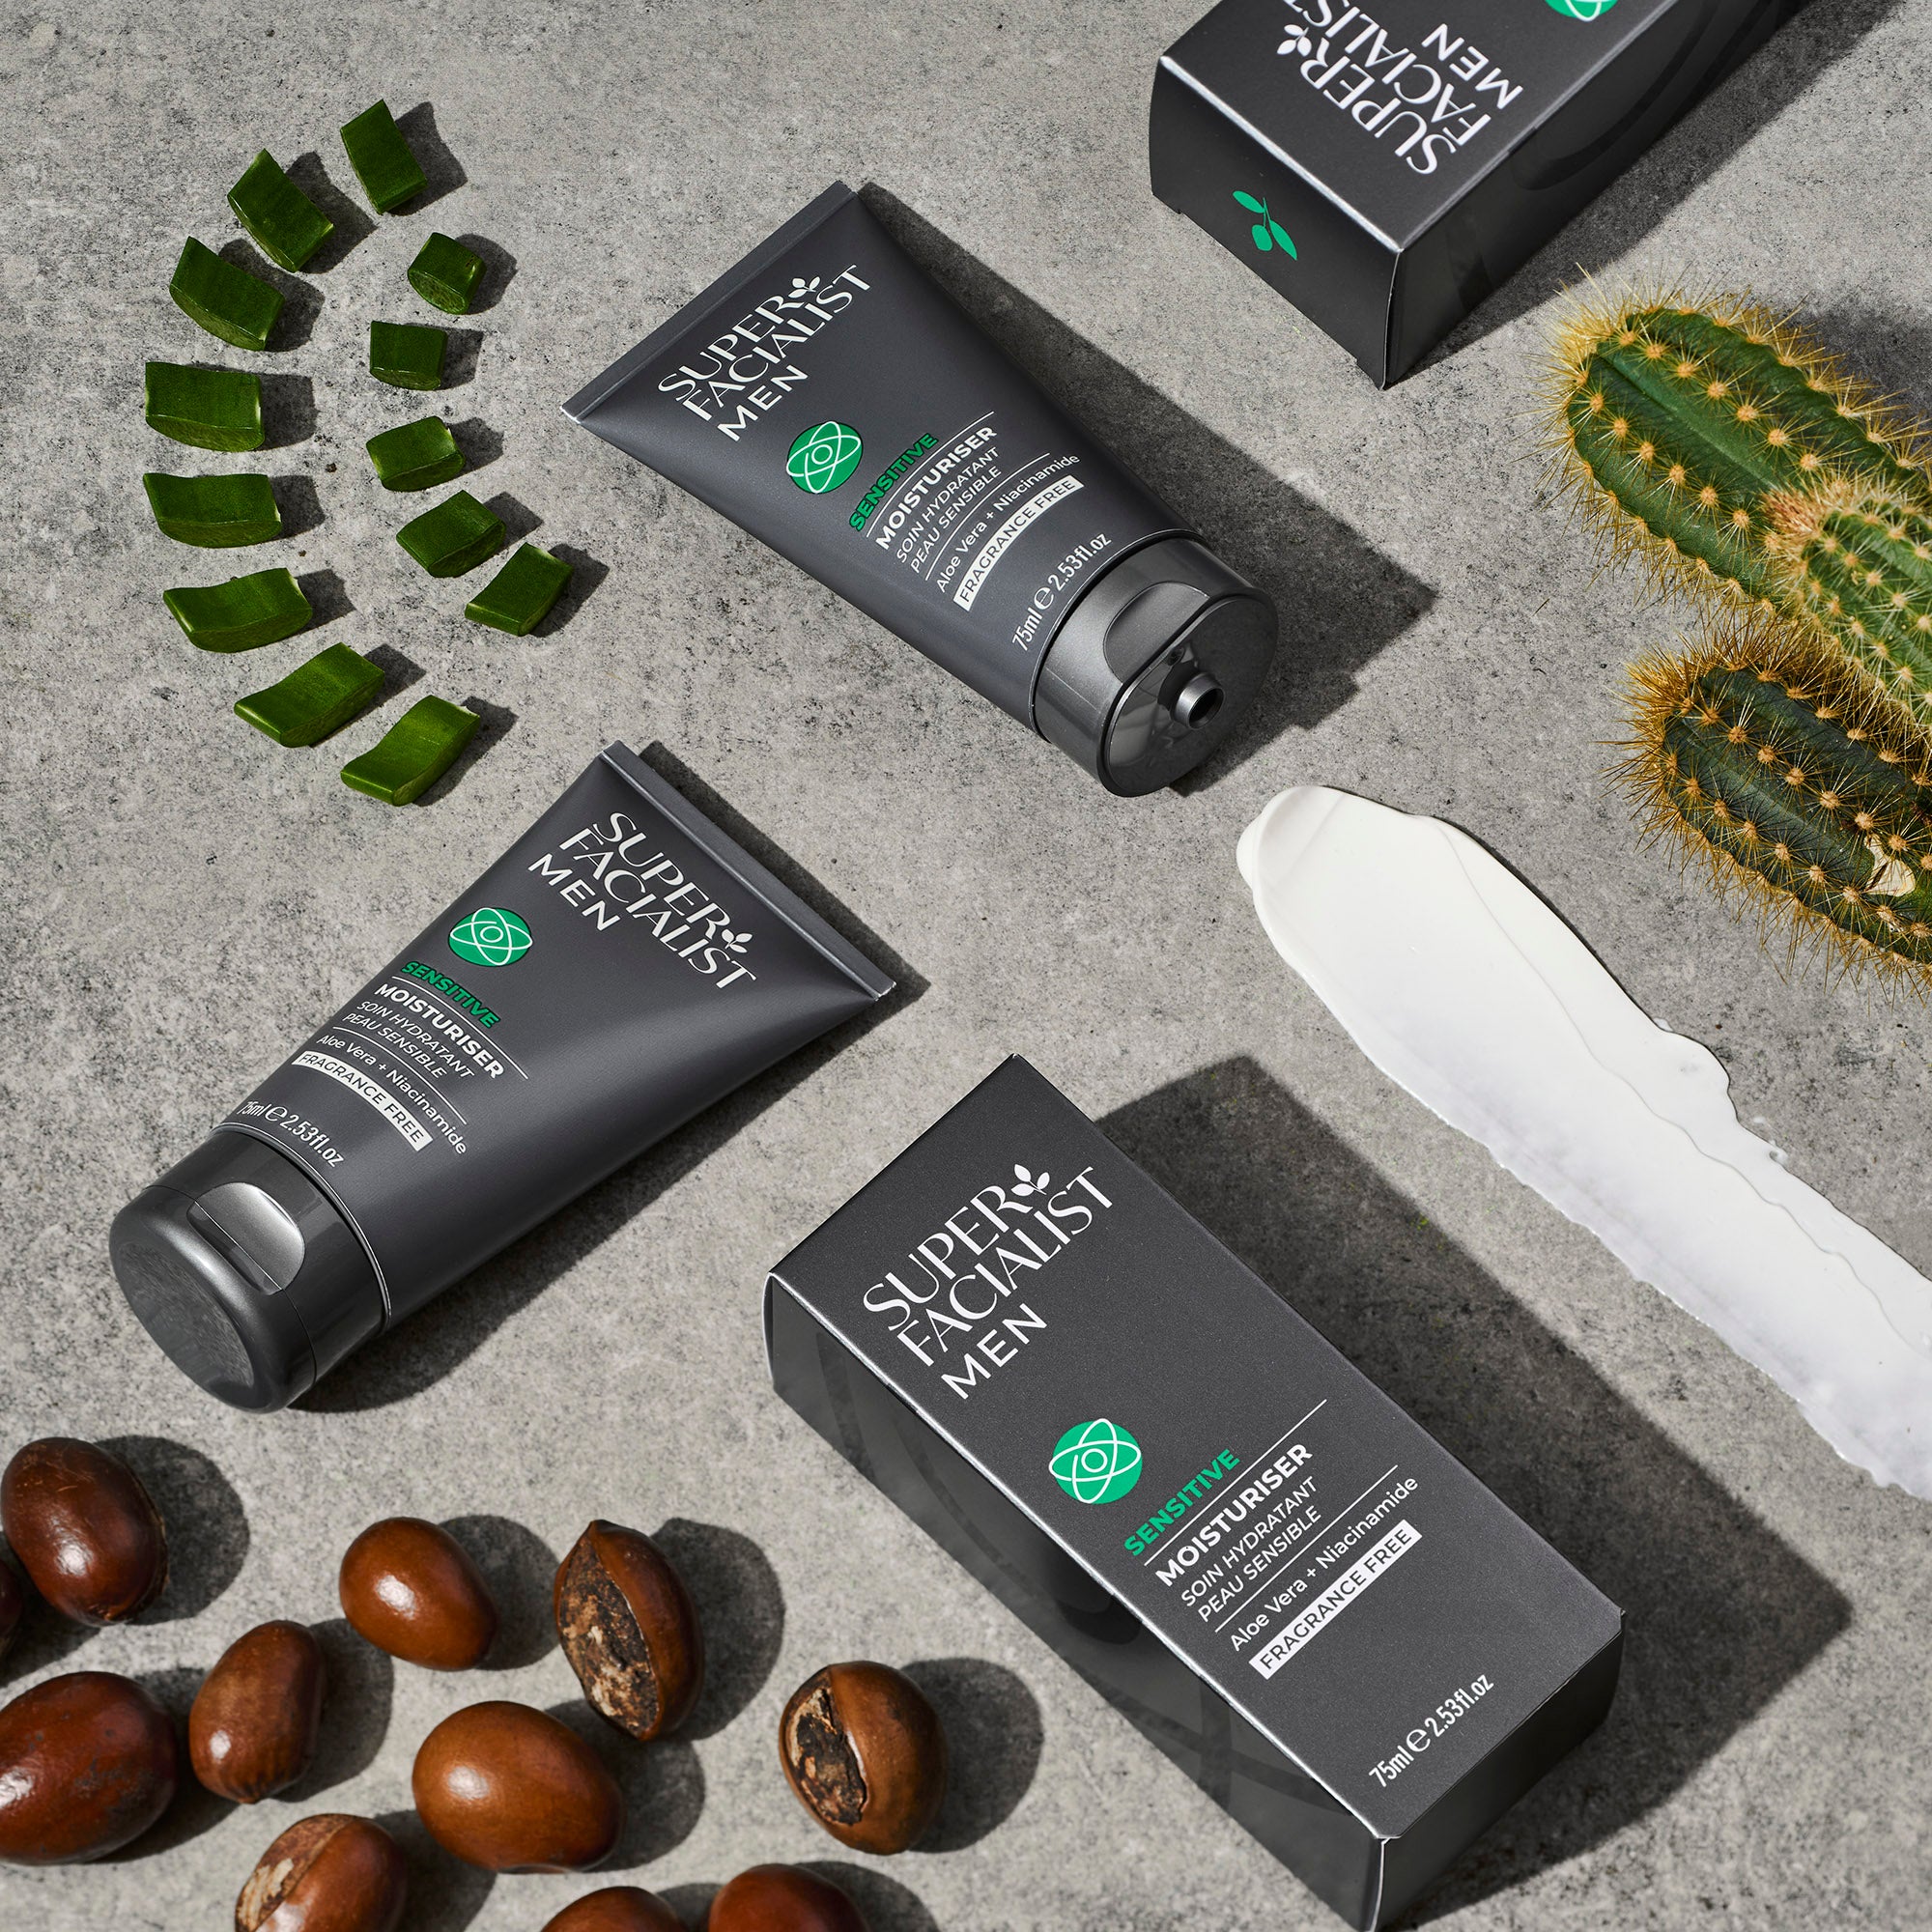 sensitive moisturiser tube and carton on stone background with shea butter, aloe vera and cactus around it